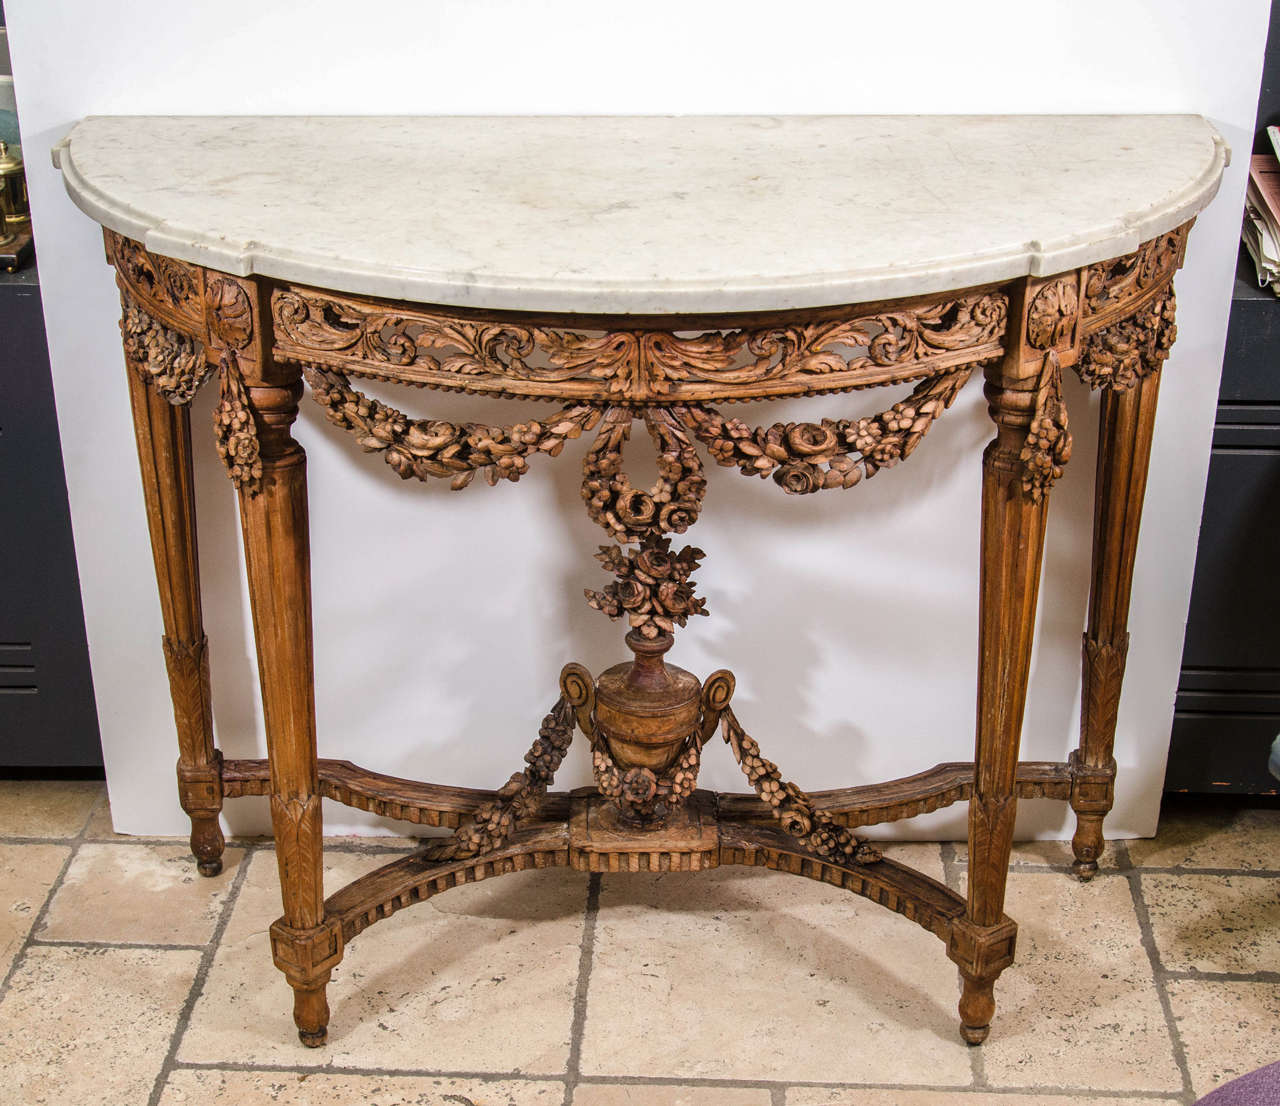 Pair of Louis XVI marble-topped carved beechwood demi-lune console tables, each with pierced foliate scroll aprons and floral garland swags and with floral urn and swags to the stretcher base.